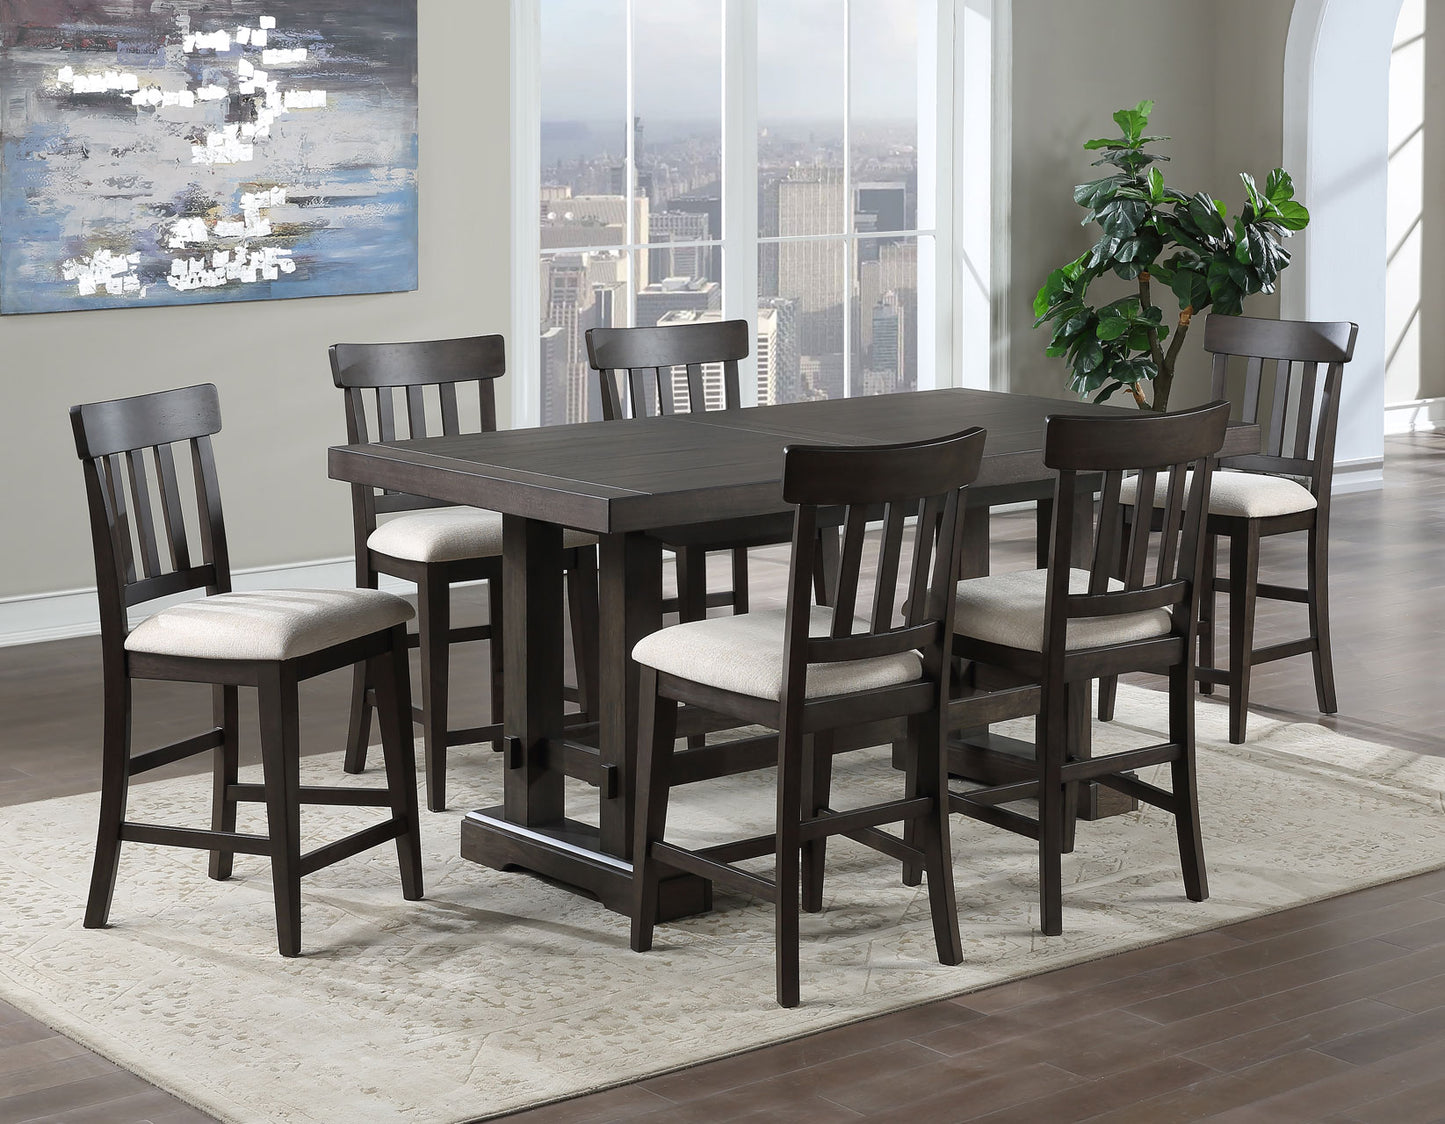 Napa 5-Piece Counter Dining Set
(Counter Table & 4 Counter Chairs)